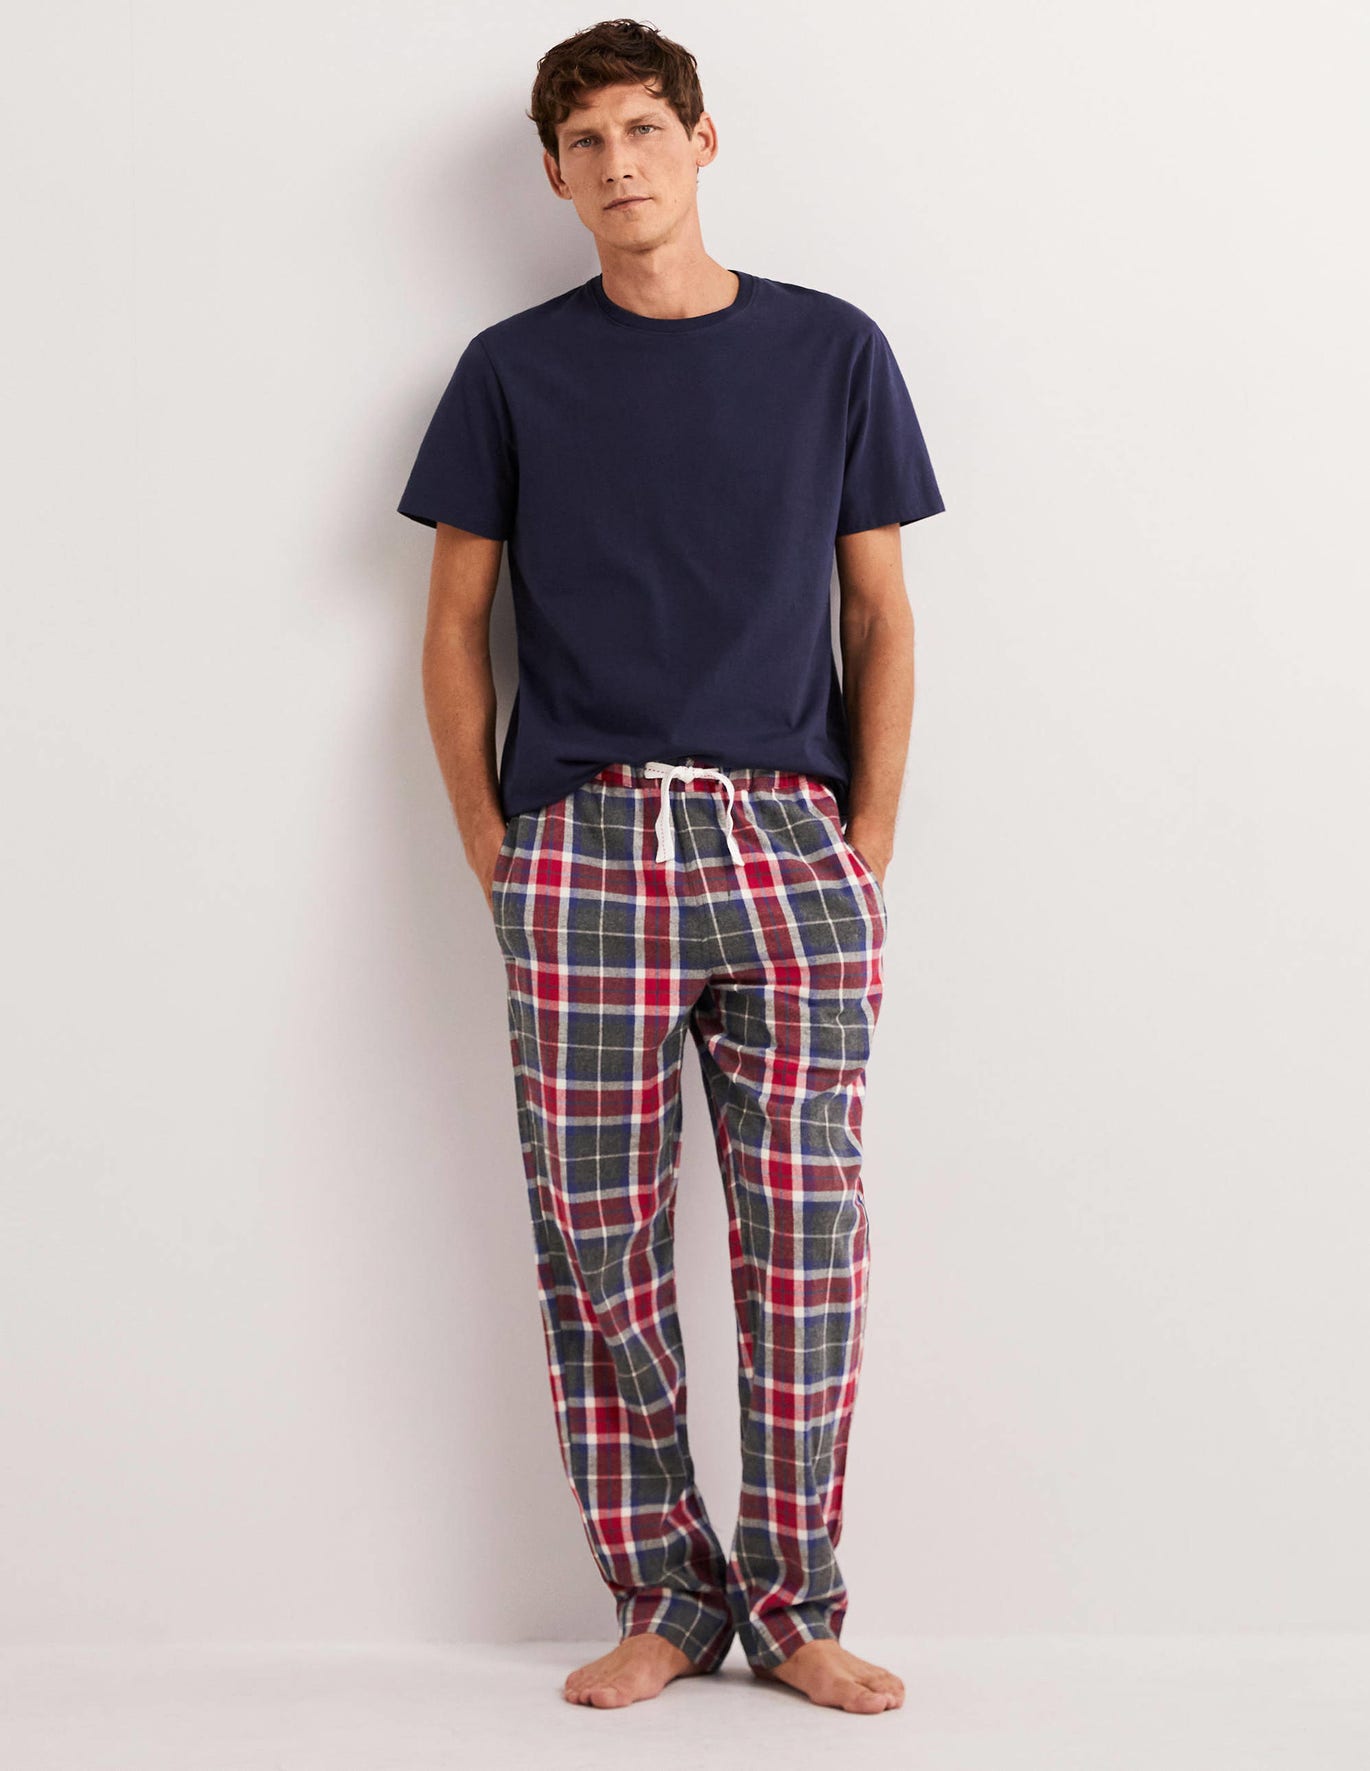 Boden Brushed Cotton Pajama Bottoms - Charcoal Marl/Red Check